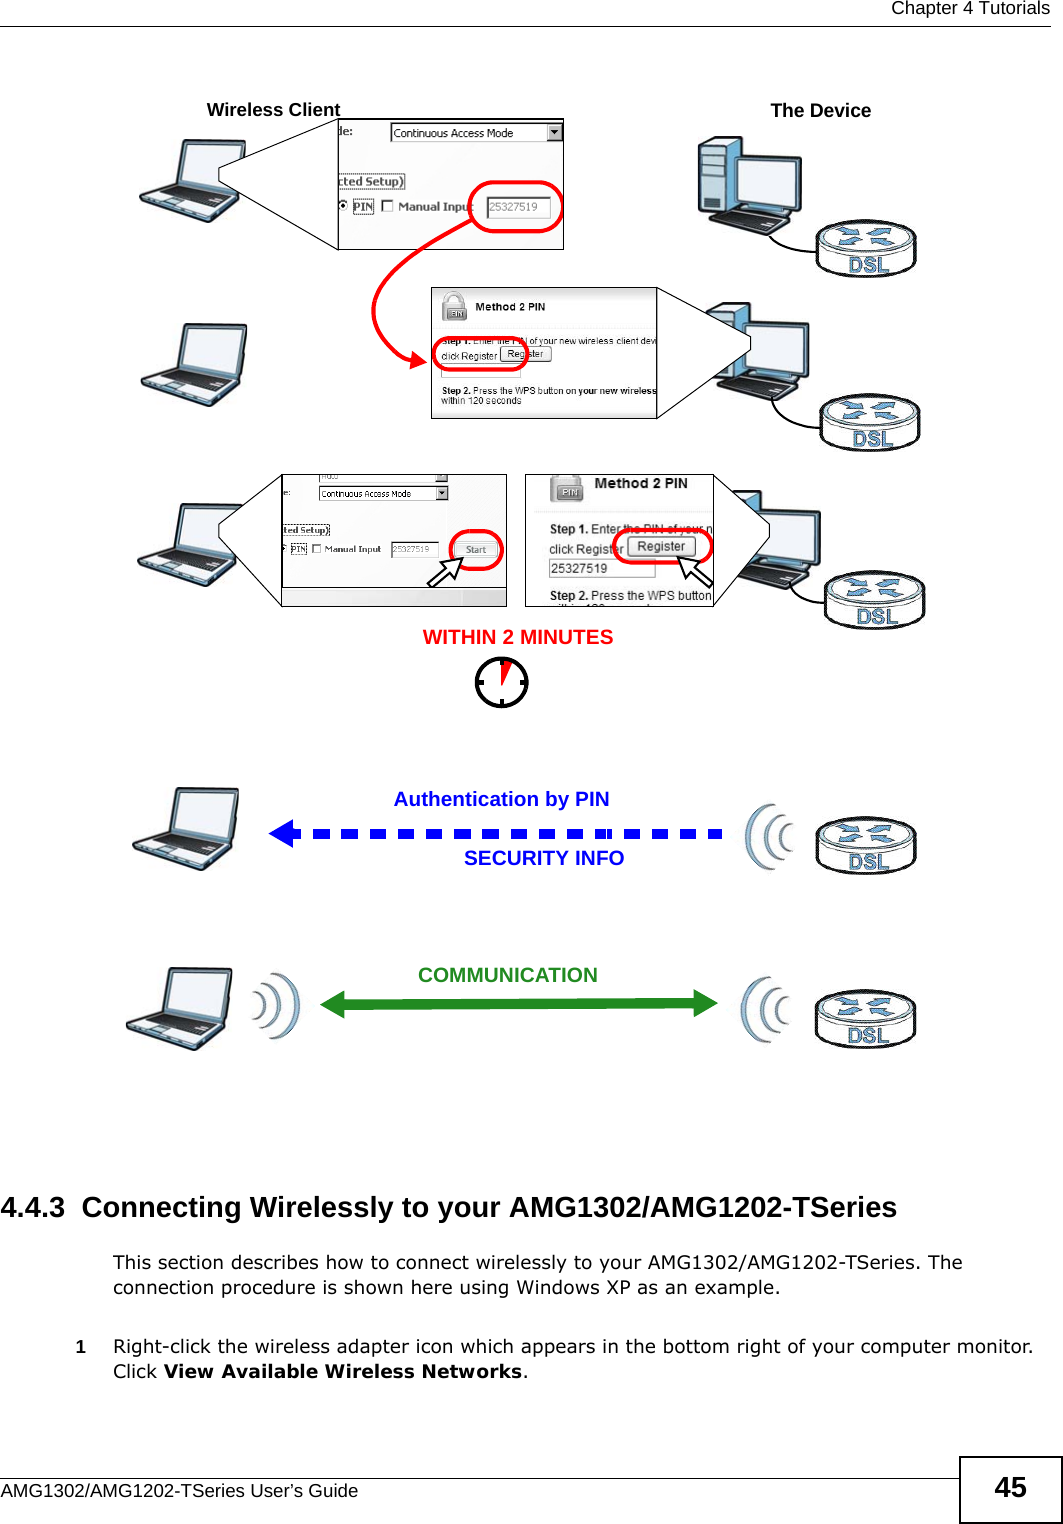  Chapter 4 TutorialsAMG1302/AMG1202-TSeries User’s Guide 45Example WPS Process: PIN Method4.4.3  Connecting Wirelessly to your AMG1302/AMG1202-TSeriesThis section describes how to connect wirelessly to your AMG1302/AMG1202-TSeries. The connection procedure is shown here using Windows XP as an example. 1Right-click the wireless adapter icon which appears in the bottom right of your computer monitor. Click View Available Wireless Networks. Authentication by PINSECURITY INFOWITHIN 2 MINUTESWireless ClientThe DeviceCOMMUNICATION